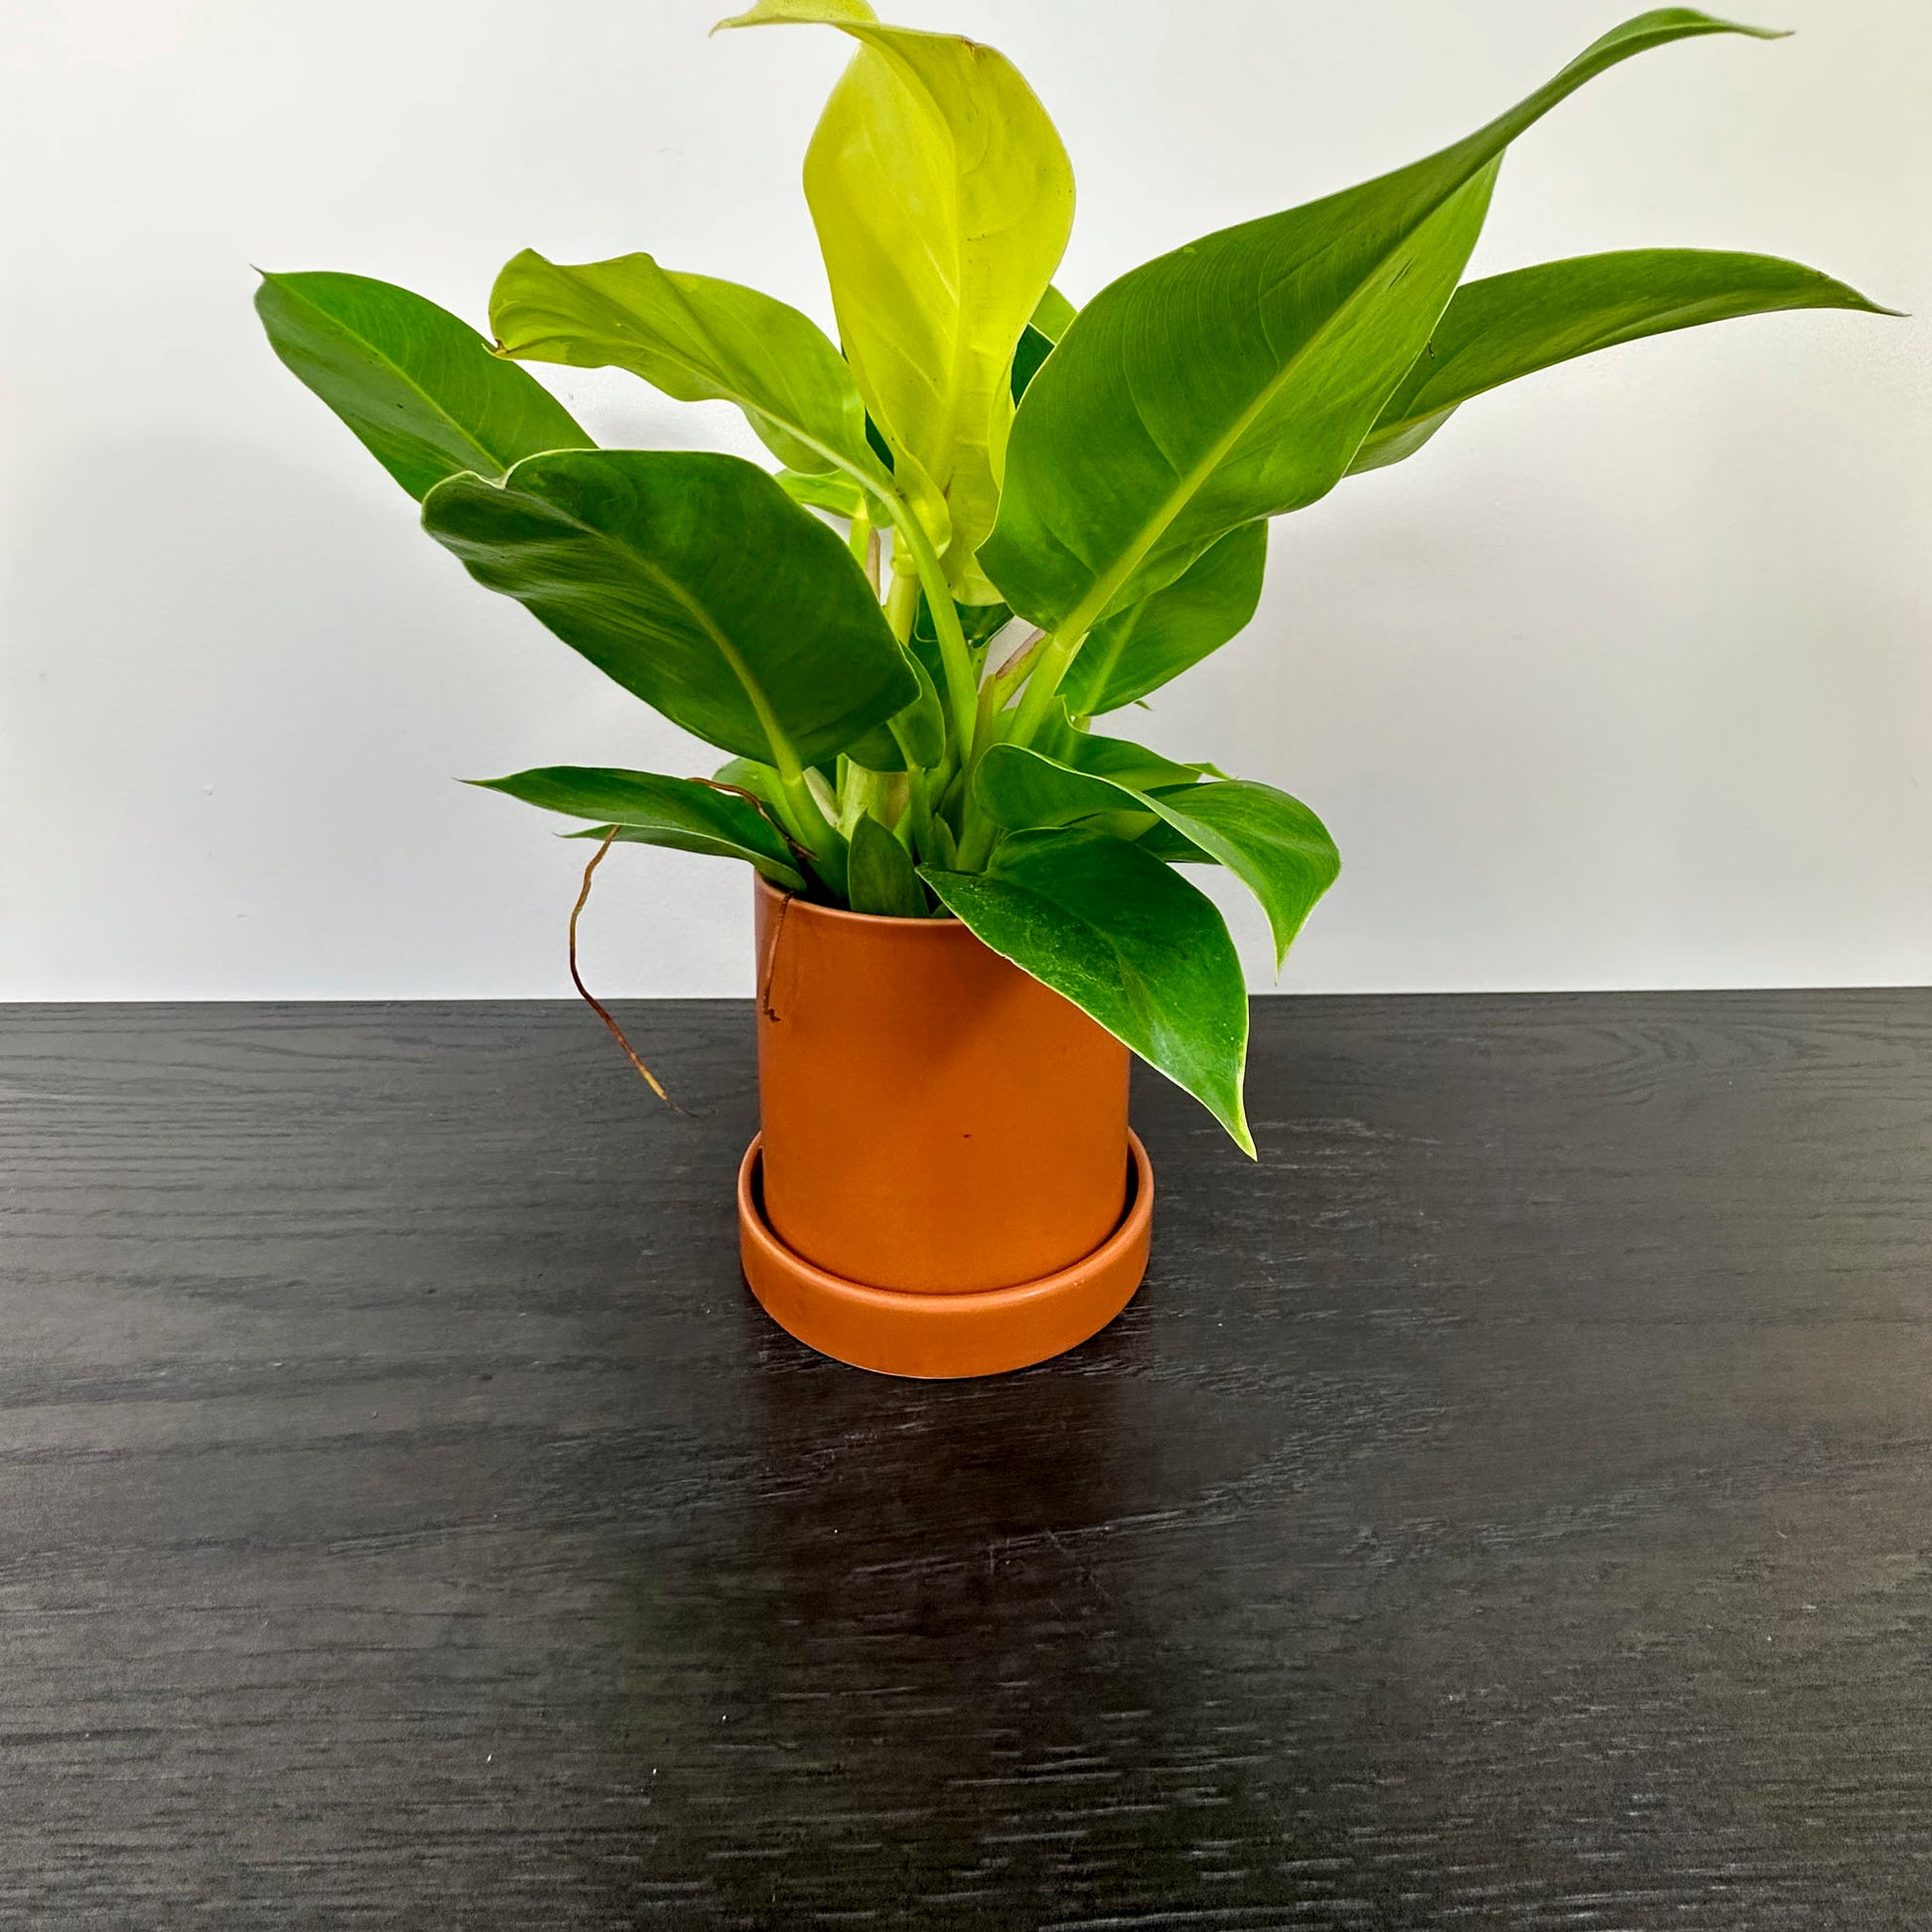 Rust ceramic planter holding a philodendron